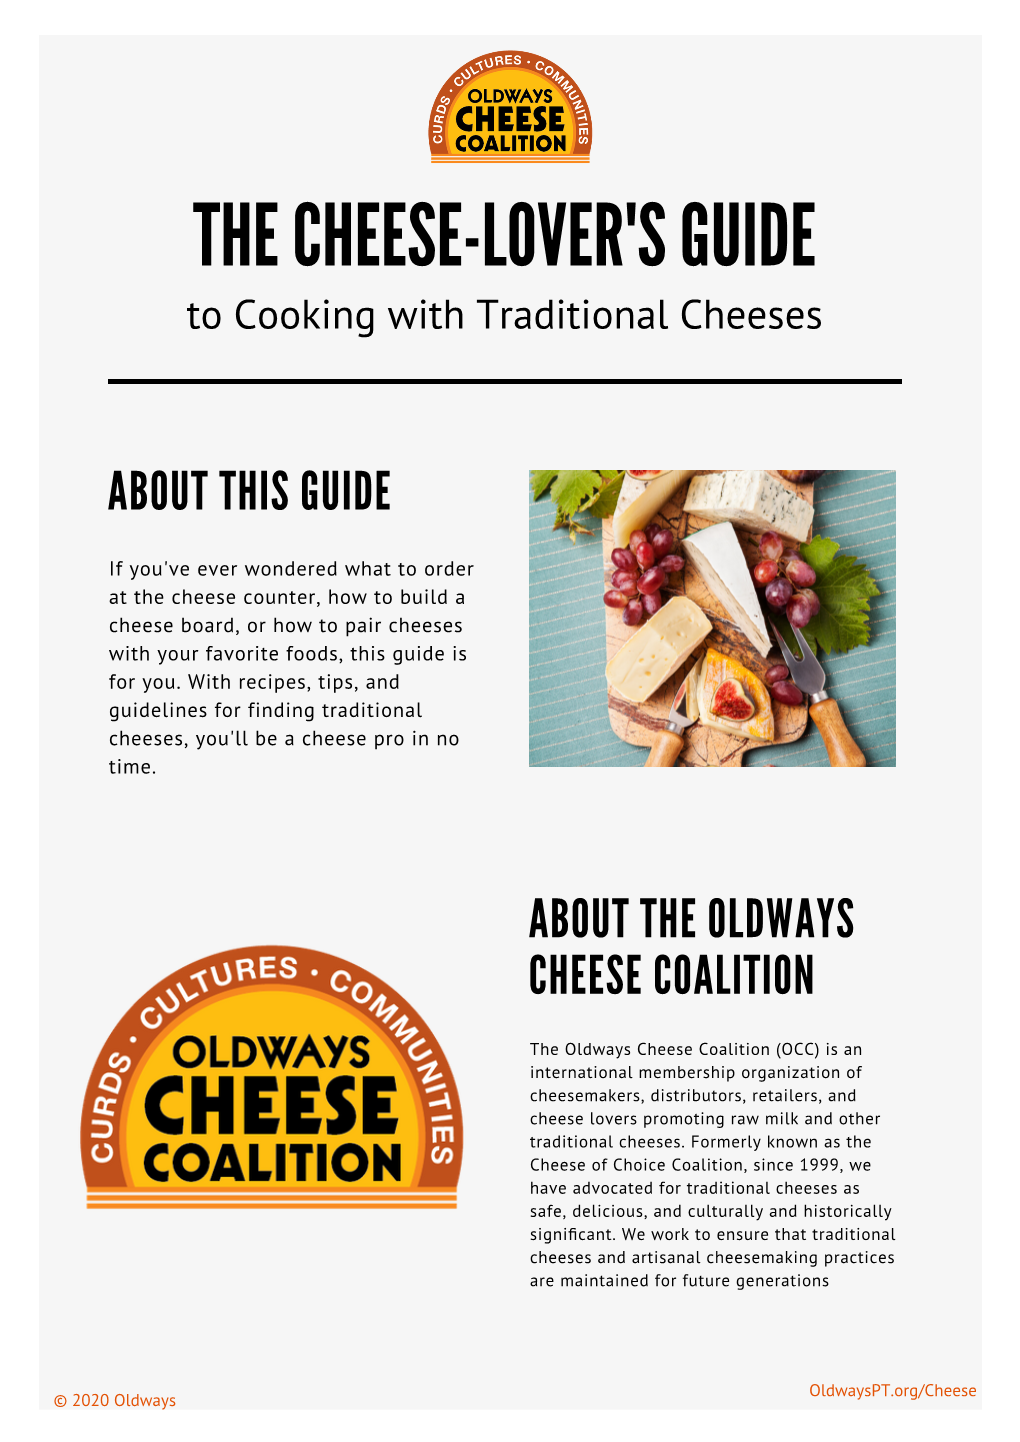 THE CHEESE-LOVER's GUIDE to Cooking with Traditional Cheeses